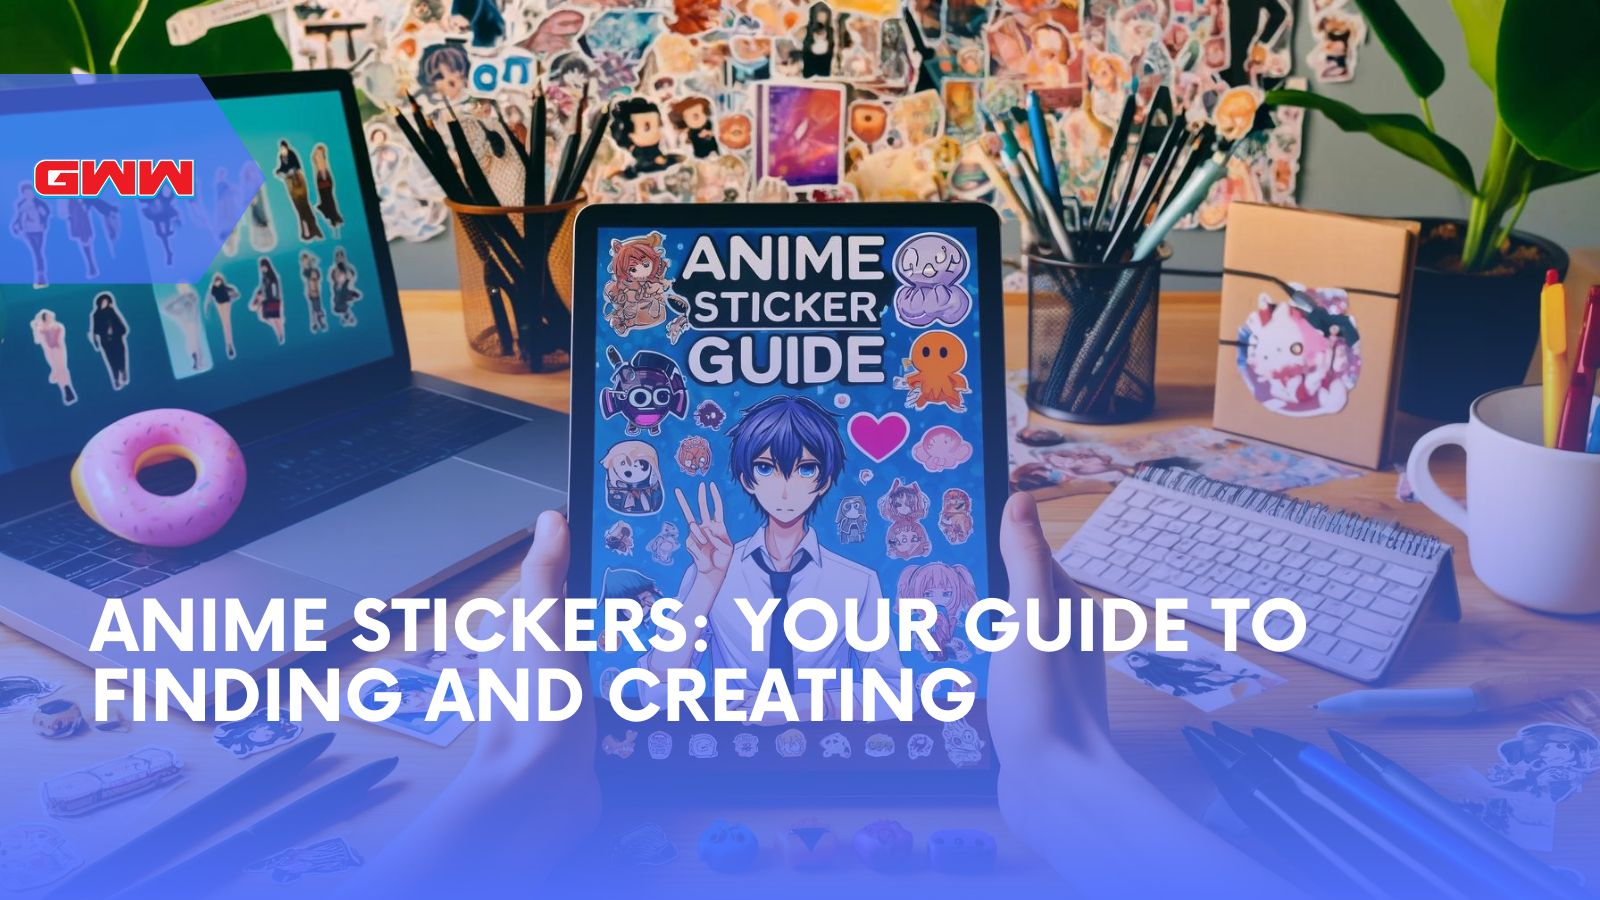 Anime Stickers: Your Guide to Finding and Creating